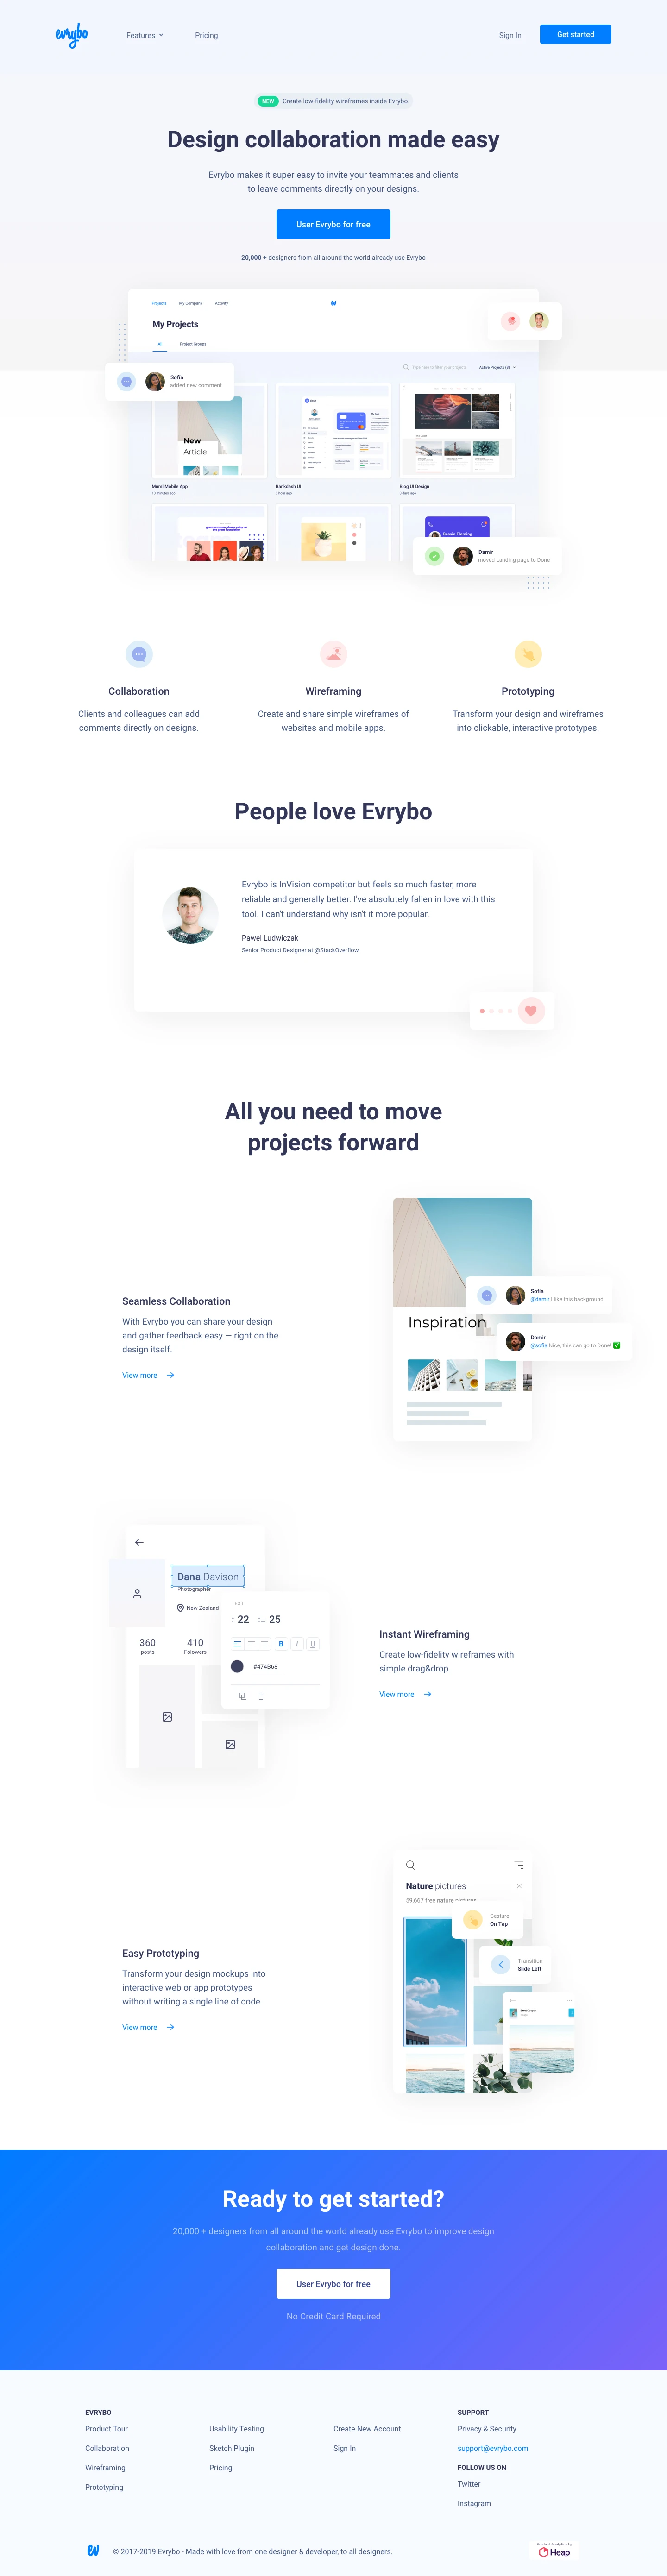 Evrybo Landing Page Example:  Design collaboration made easy. Evrybo makes it super easy to invite your teammates and clientsto leave comments directly on your designs.